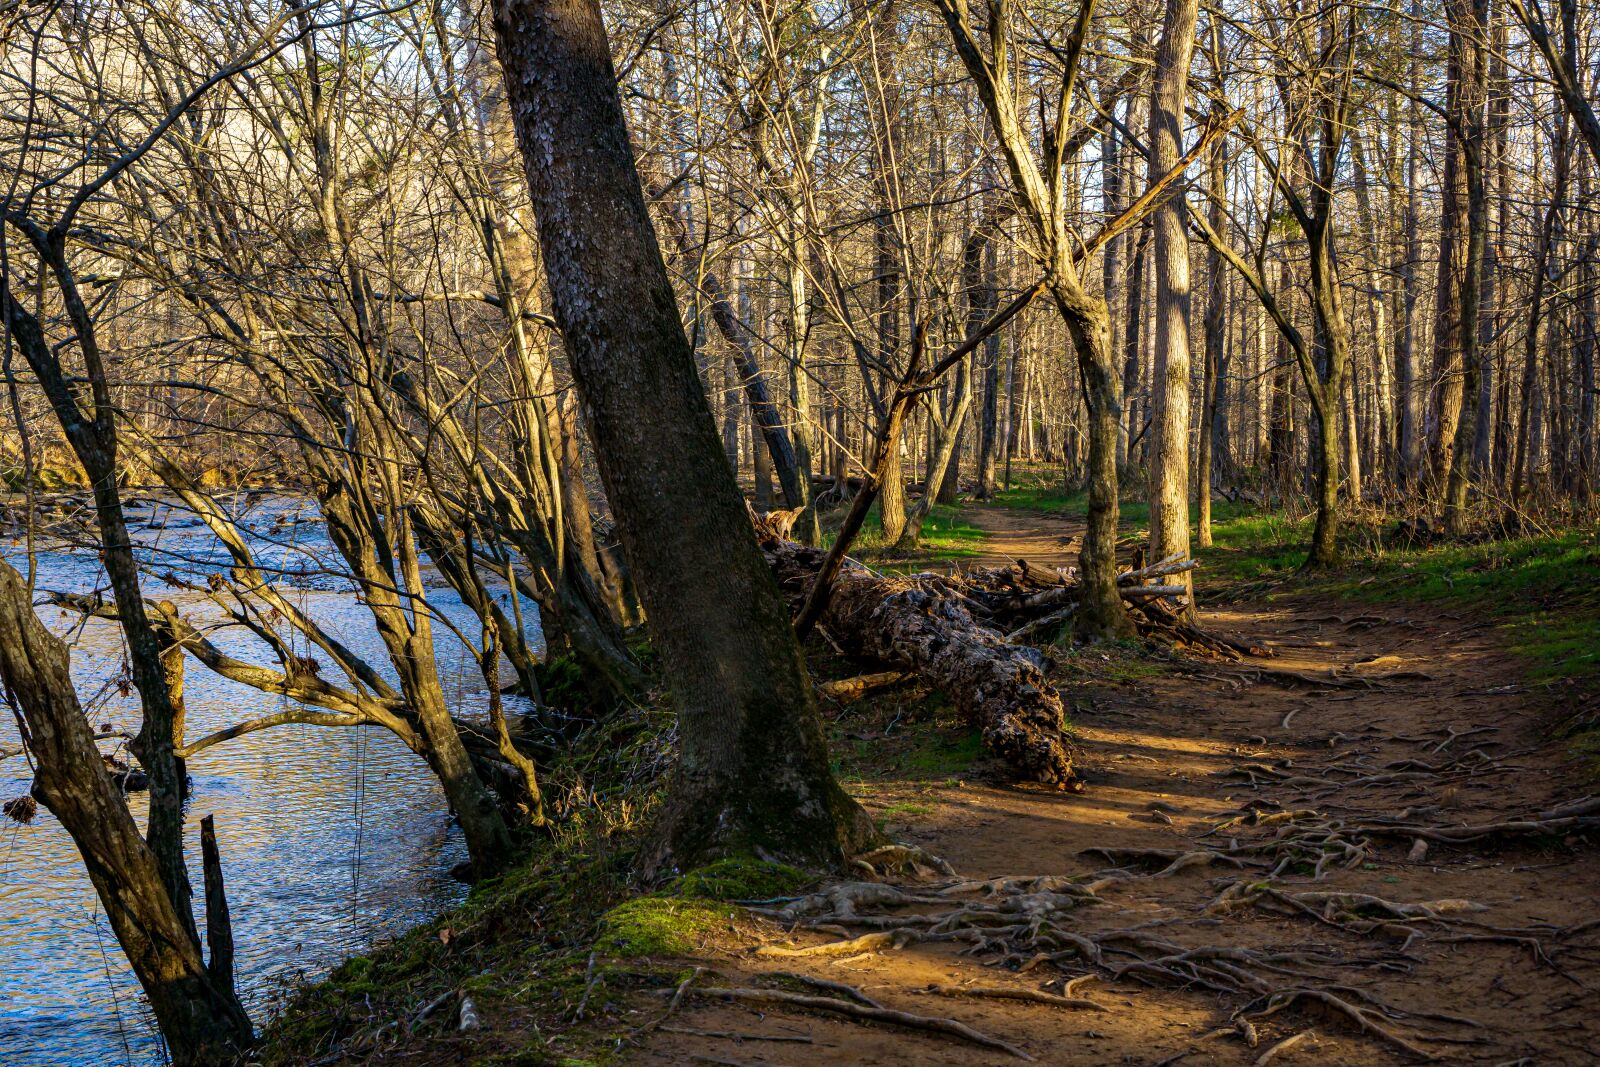 Sony a6000 sample photo. Eno river, state park photography